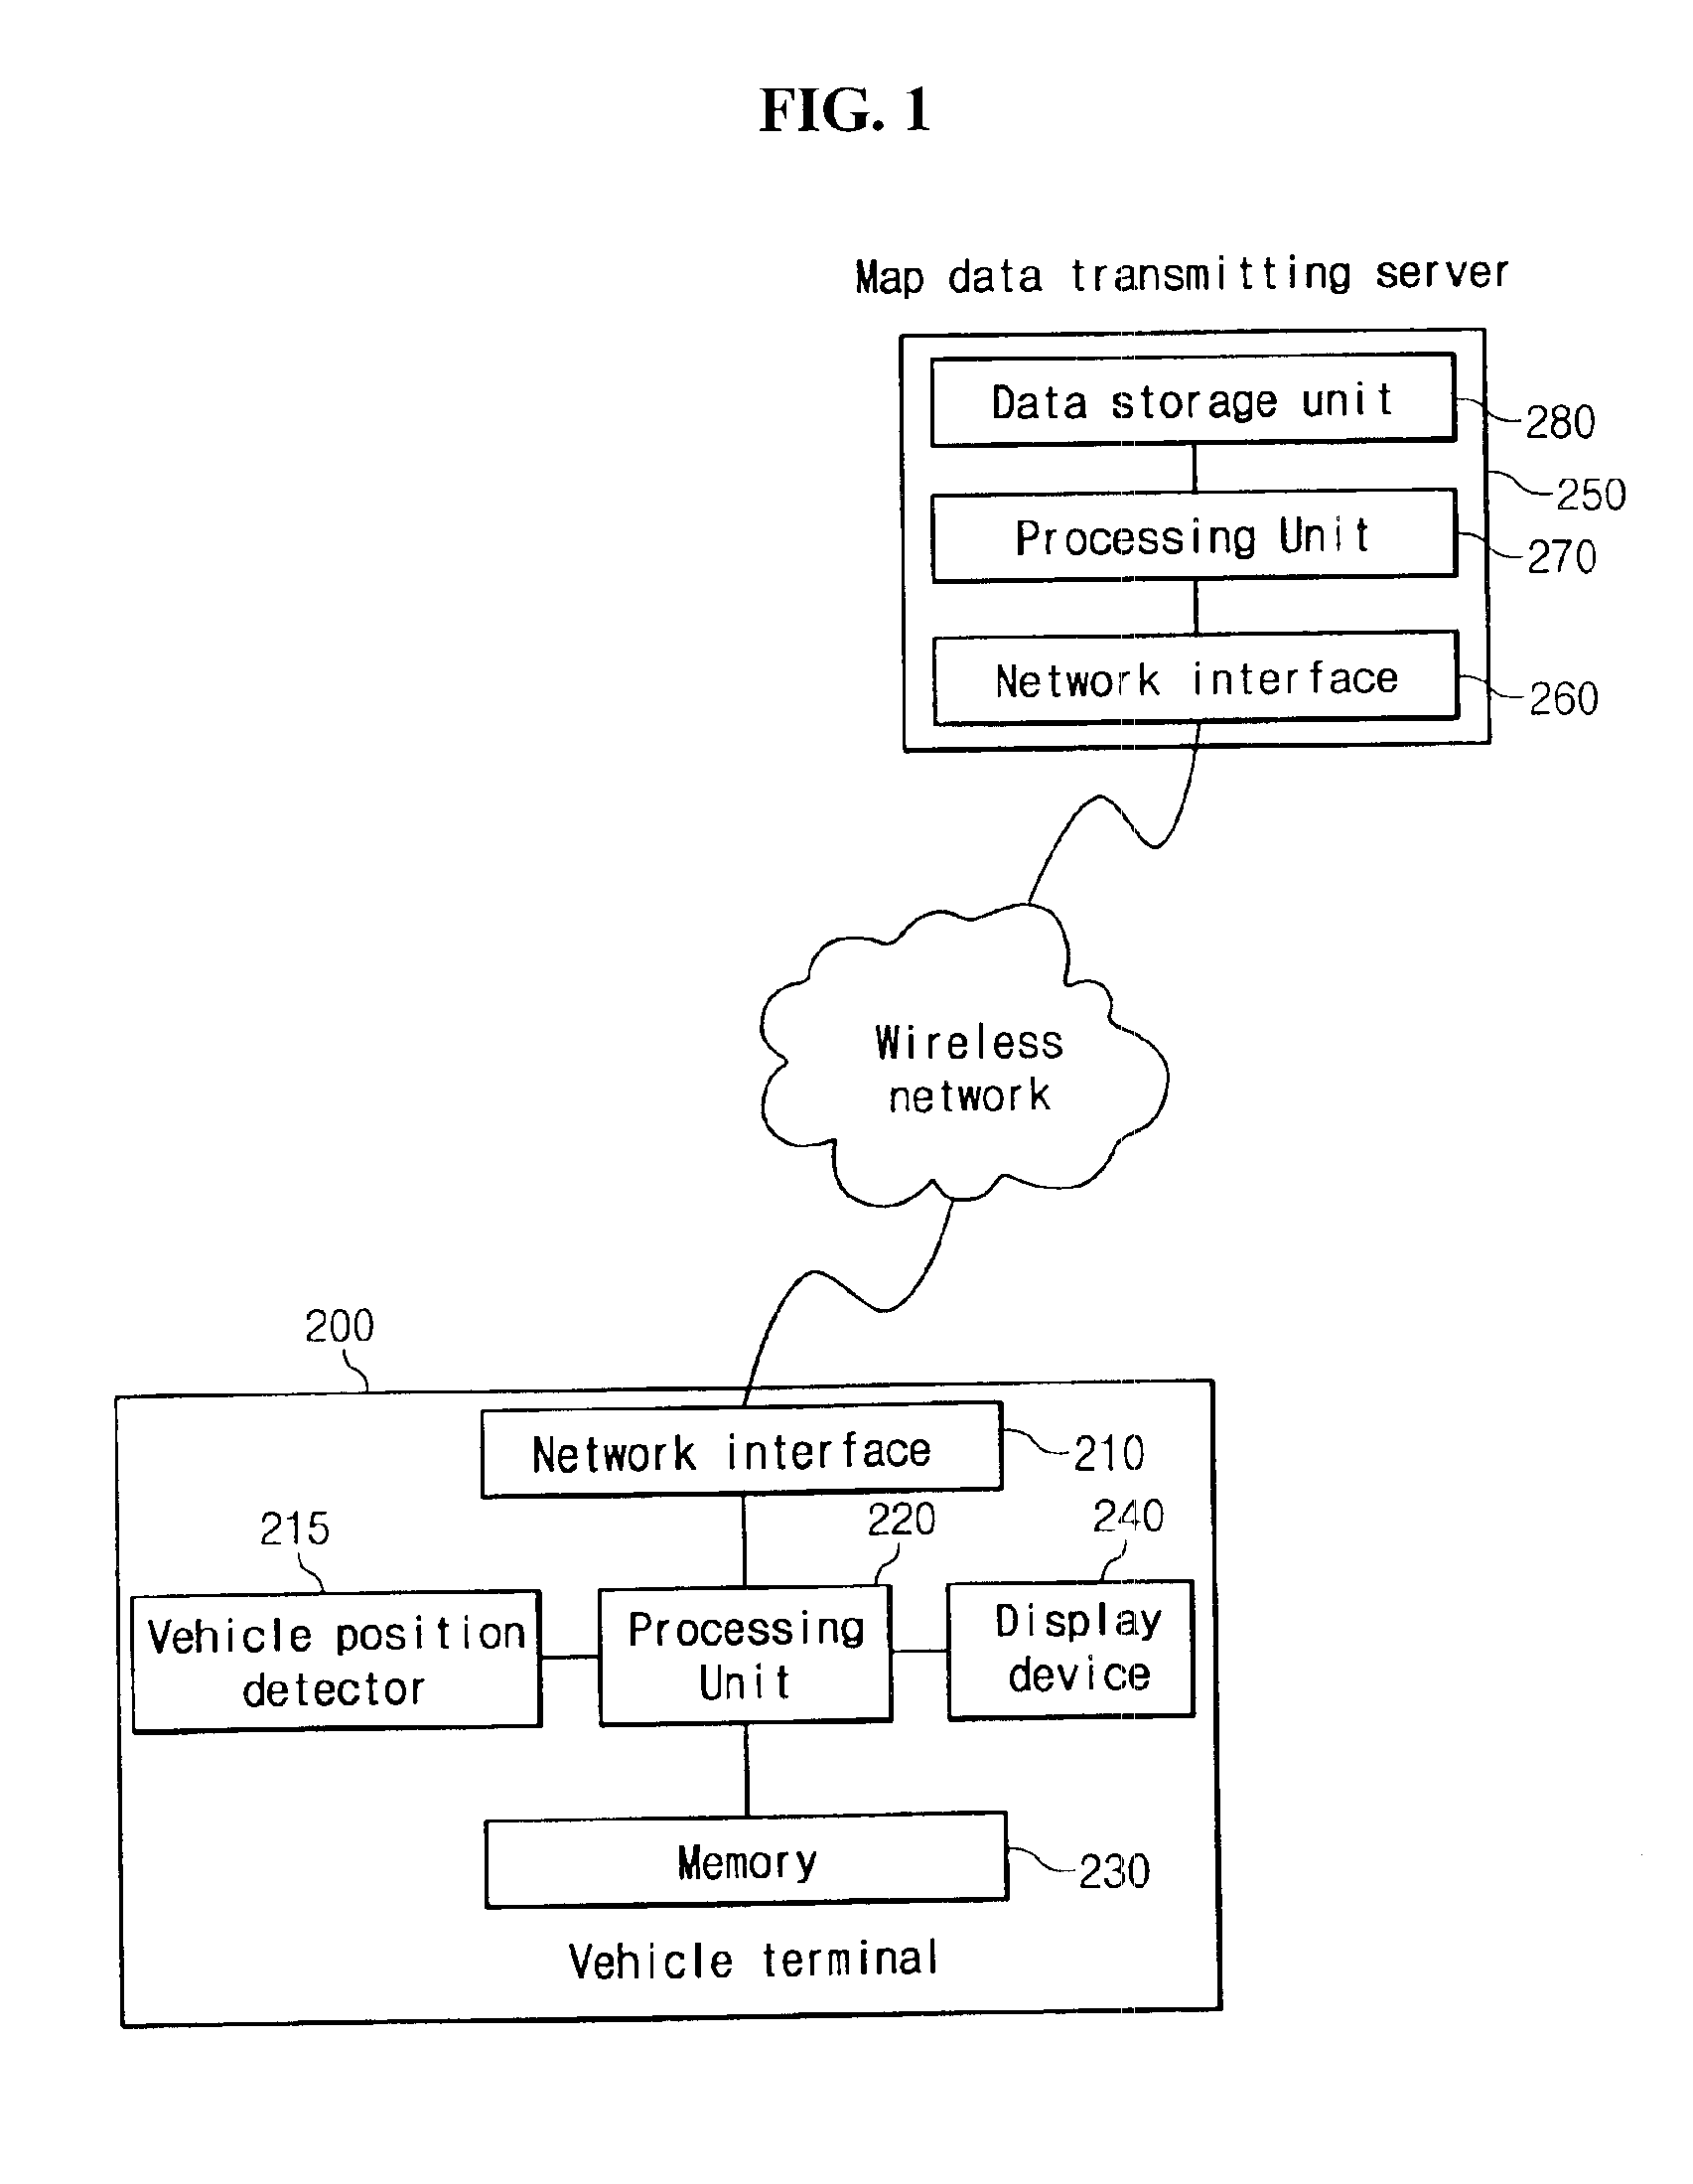 Method and apparatus for communicating map data for vehicle navigation